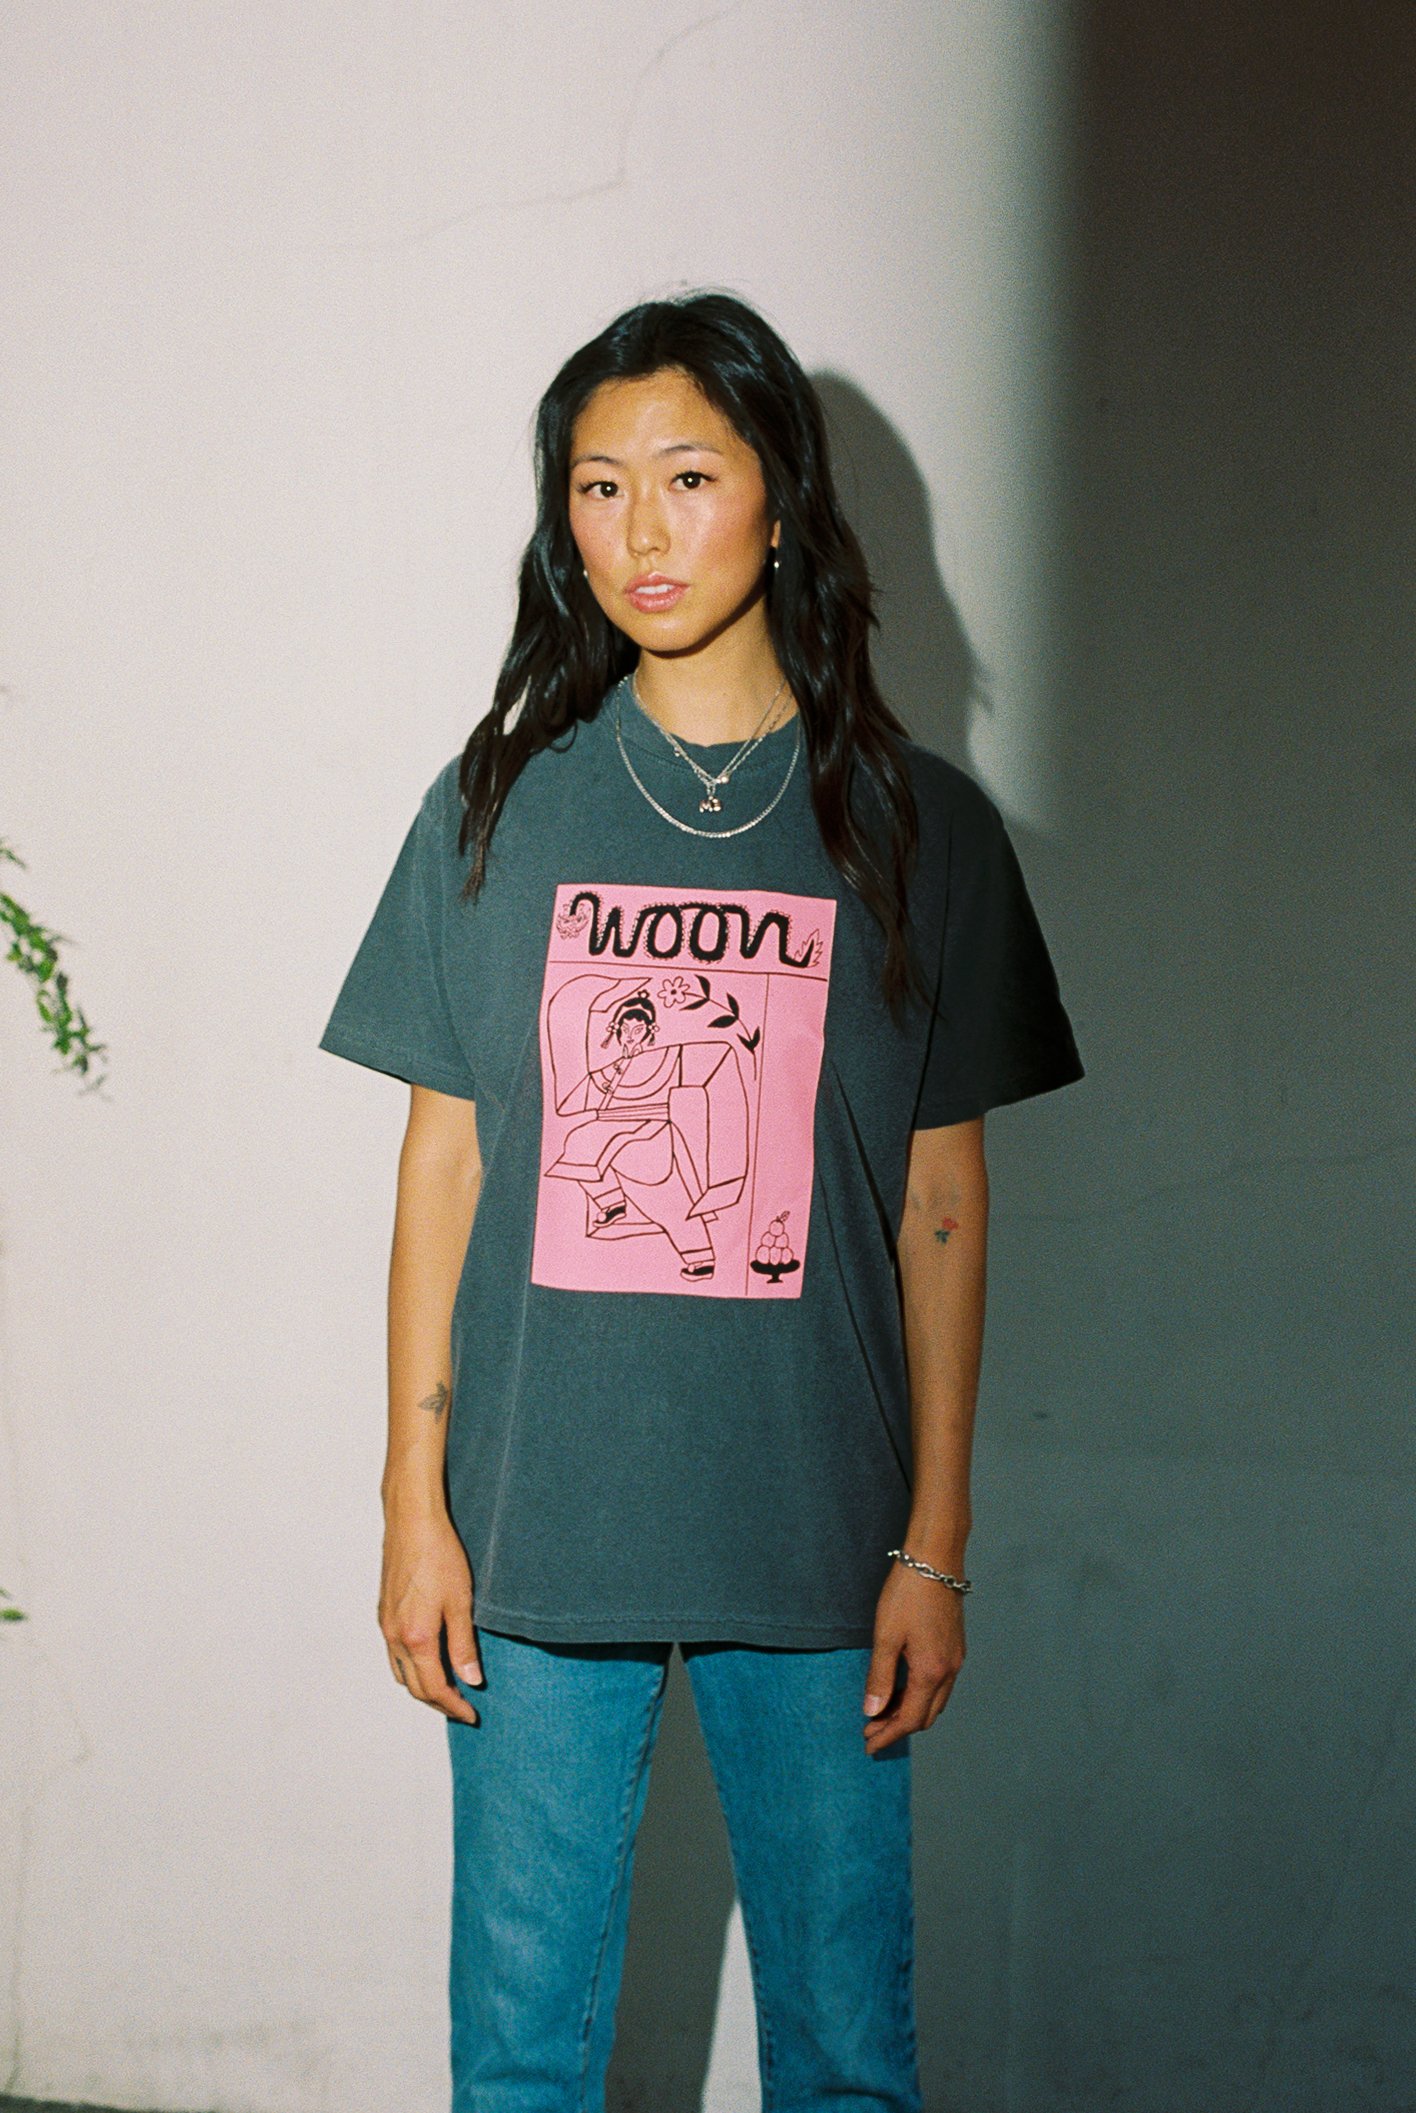 Someone wearing a faded black t-shirt with pink artwork